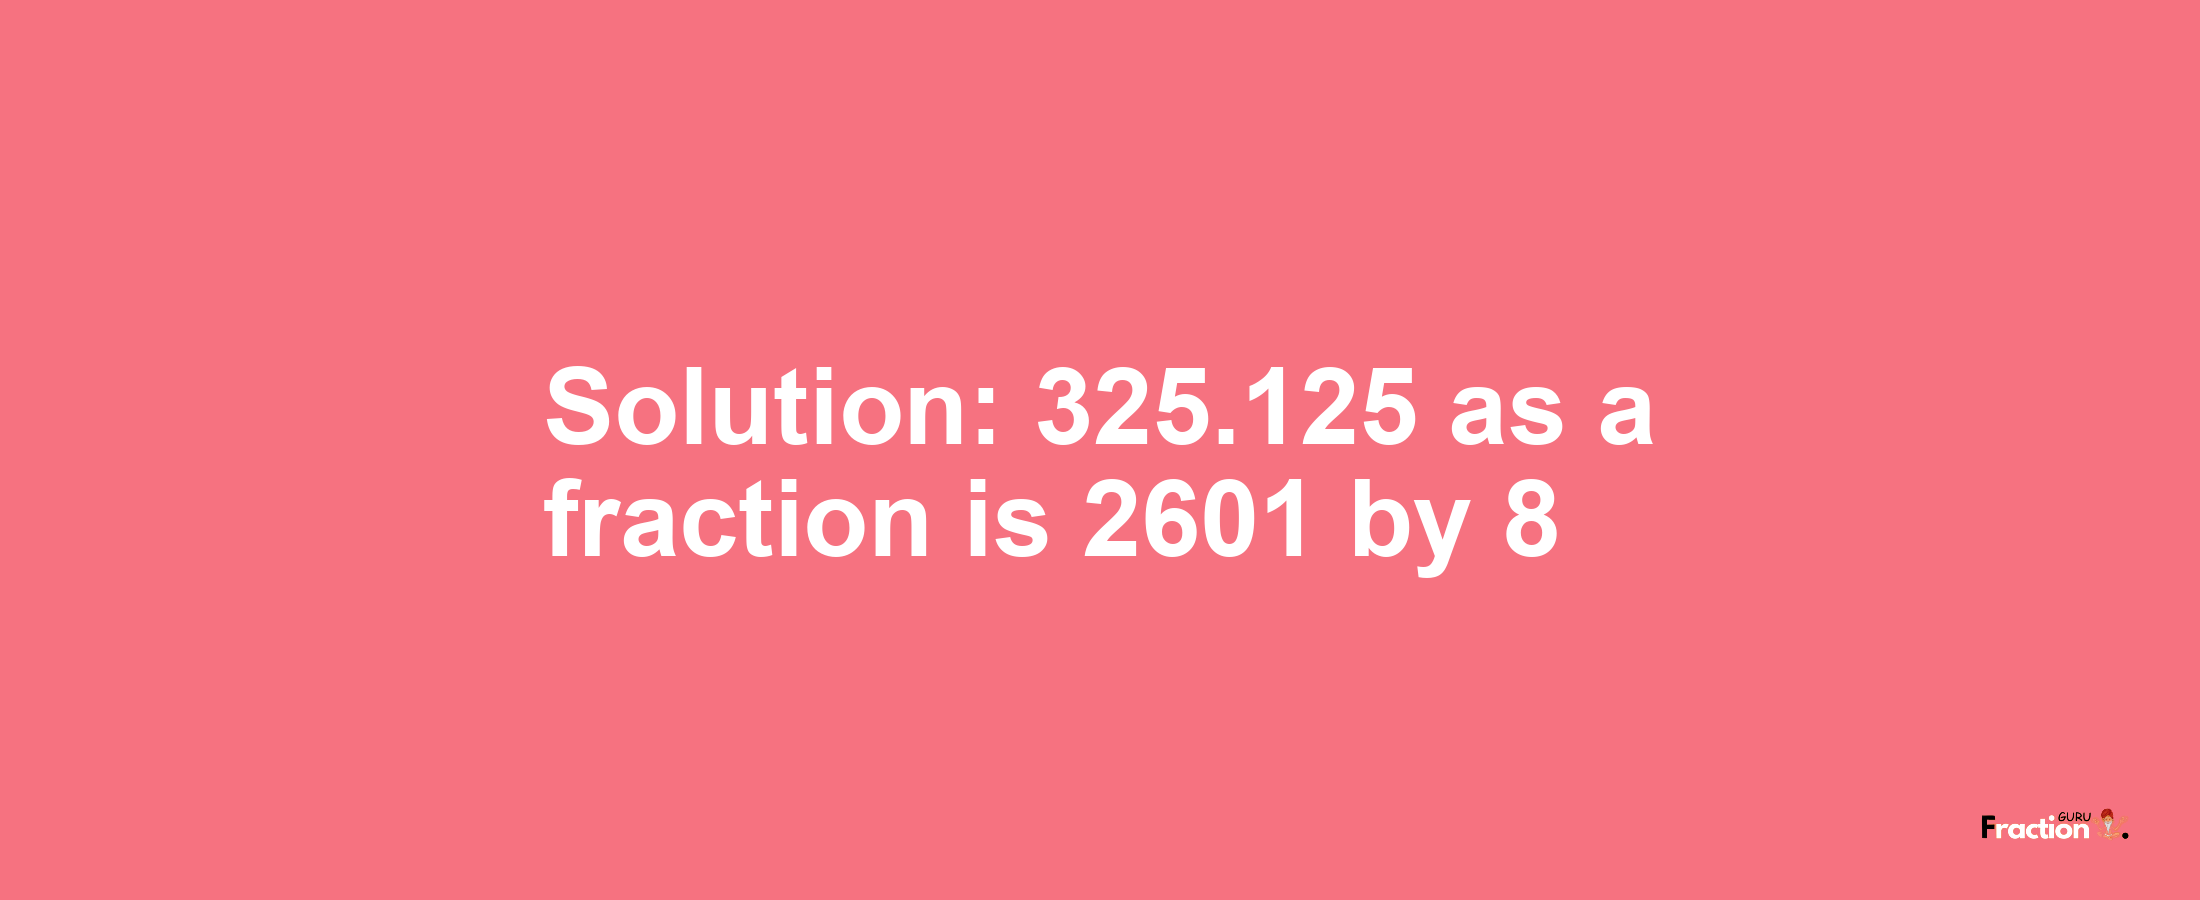 Solution:325.125 as a fraction is 2601/8